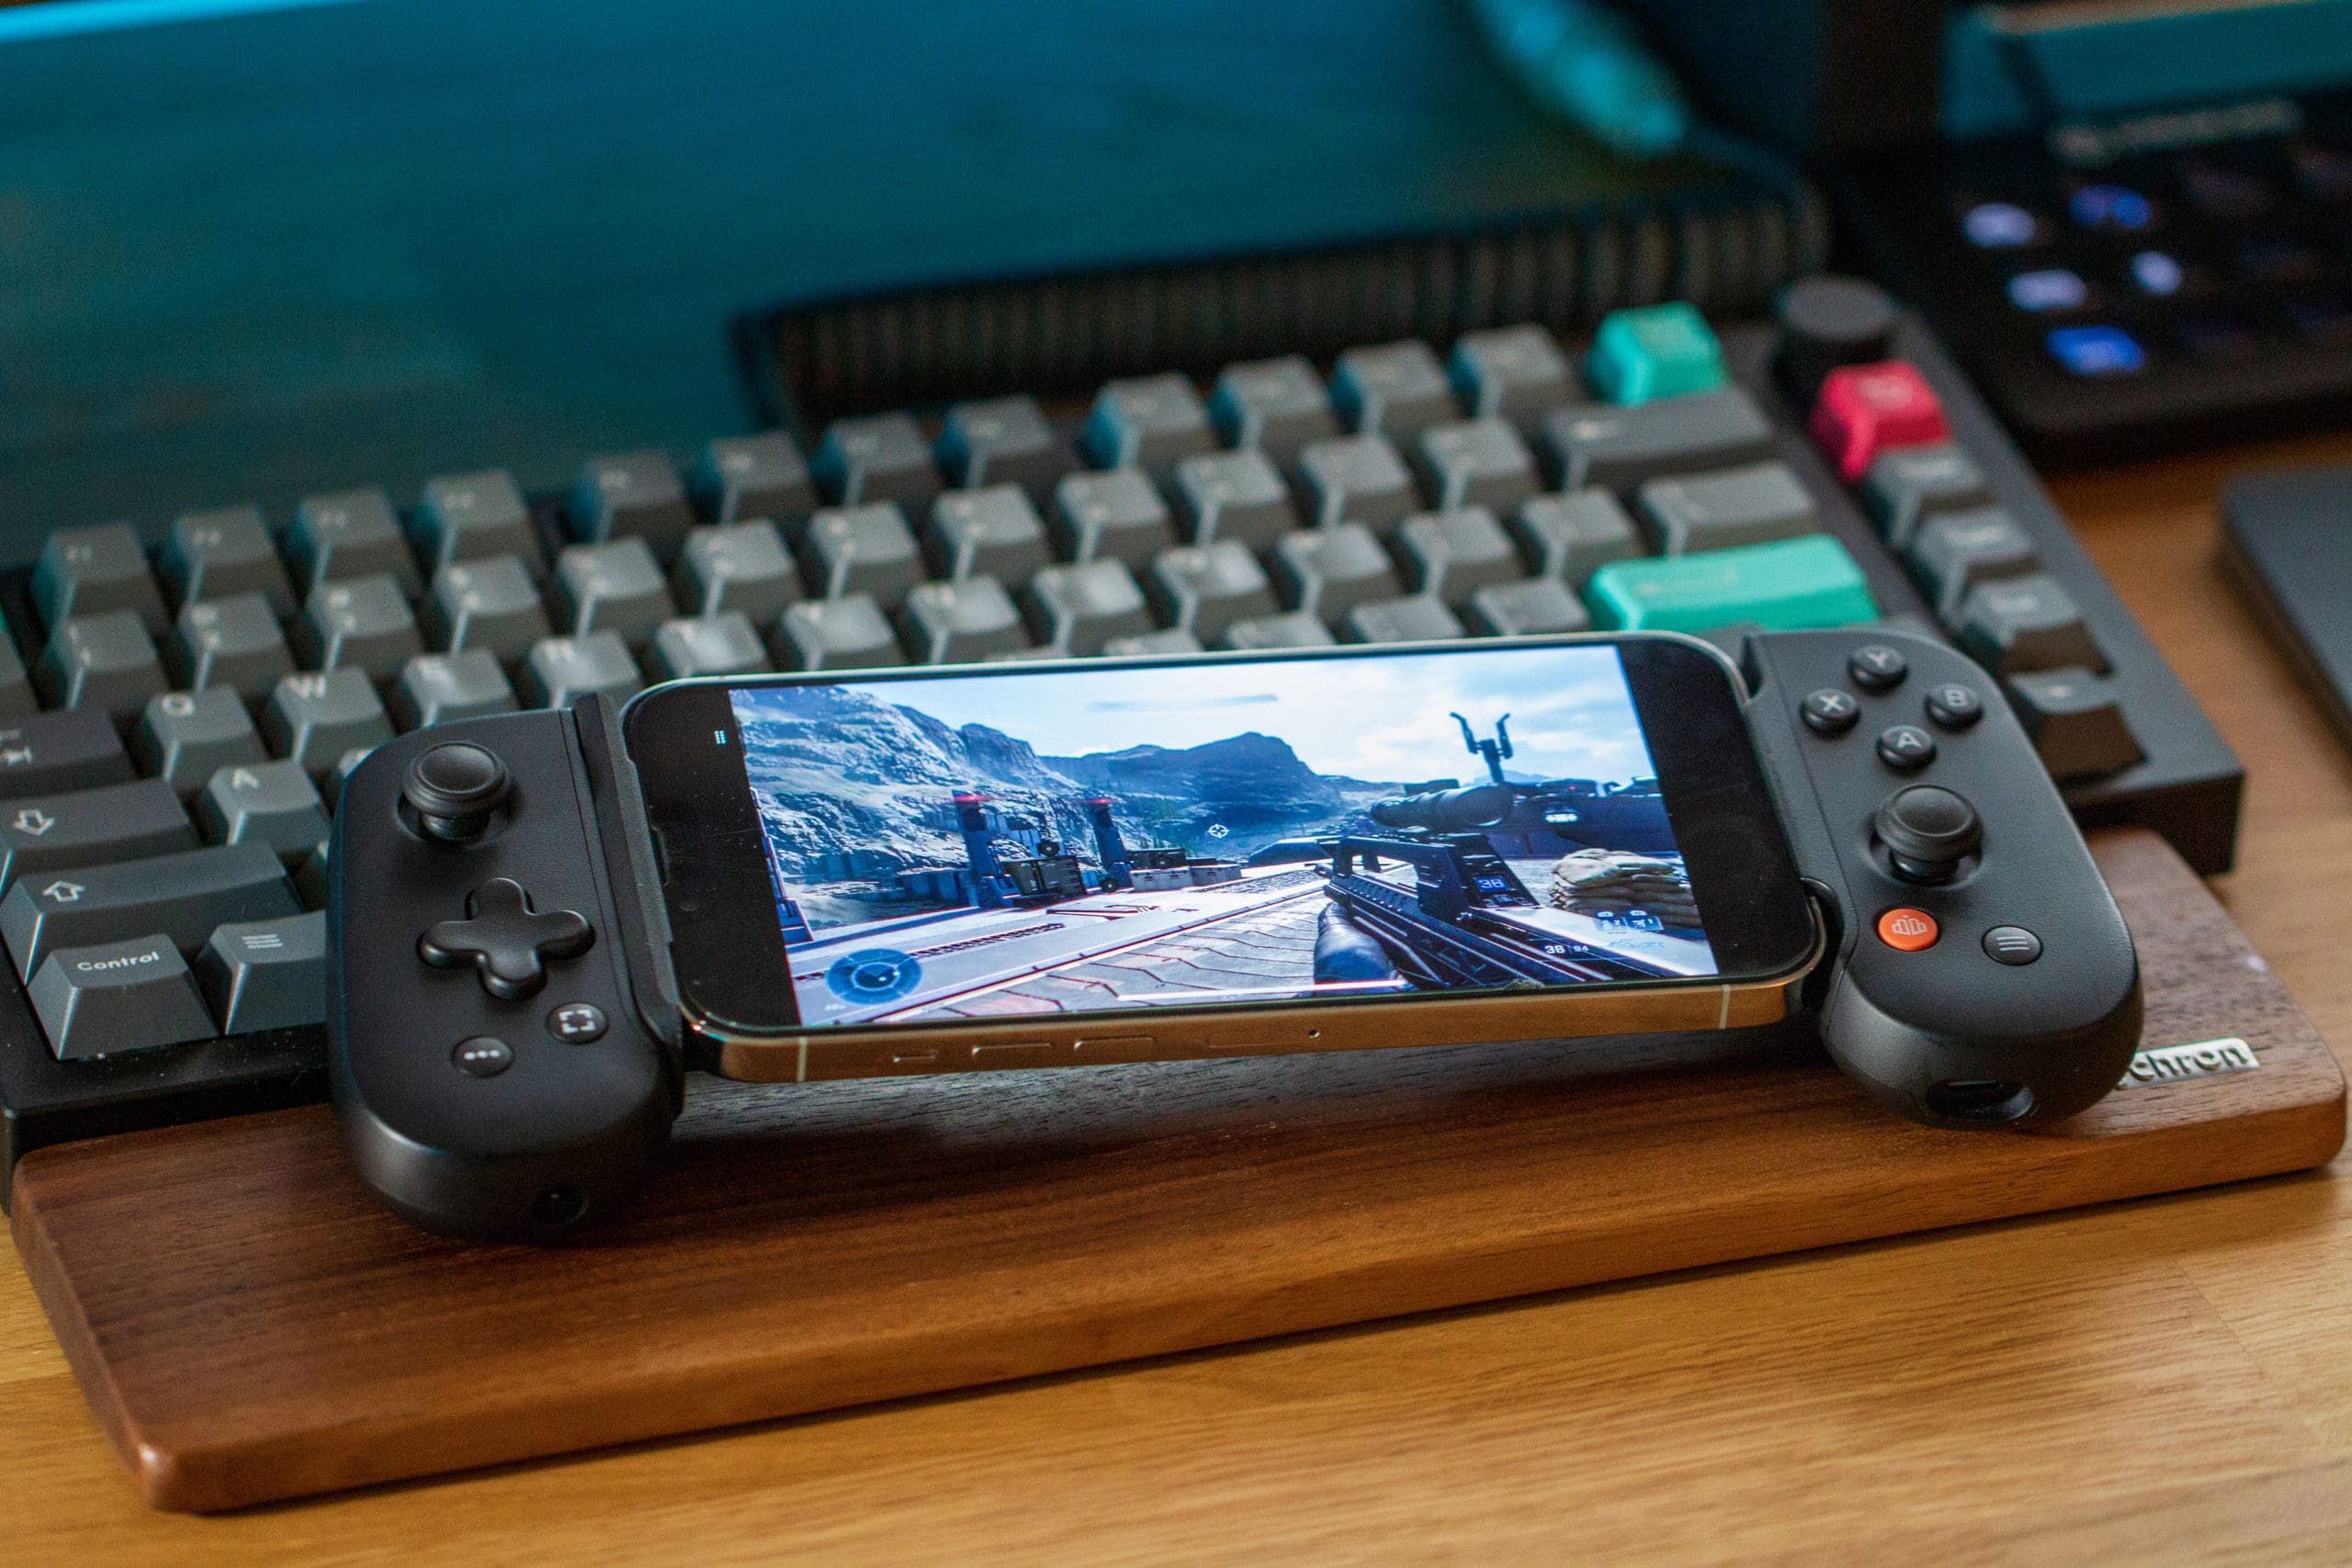 Backbone reveals an update to the best mobile gaming controller on the  market